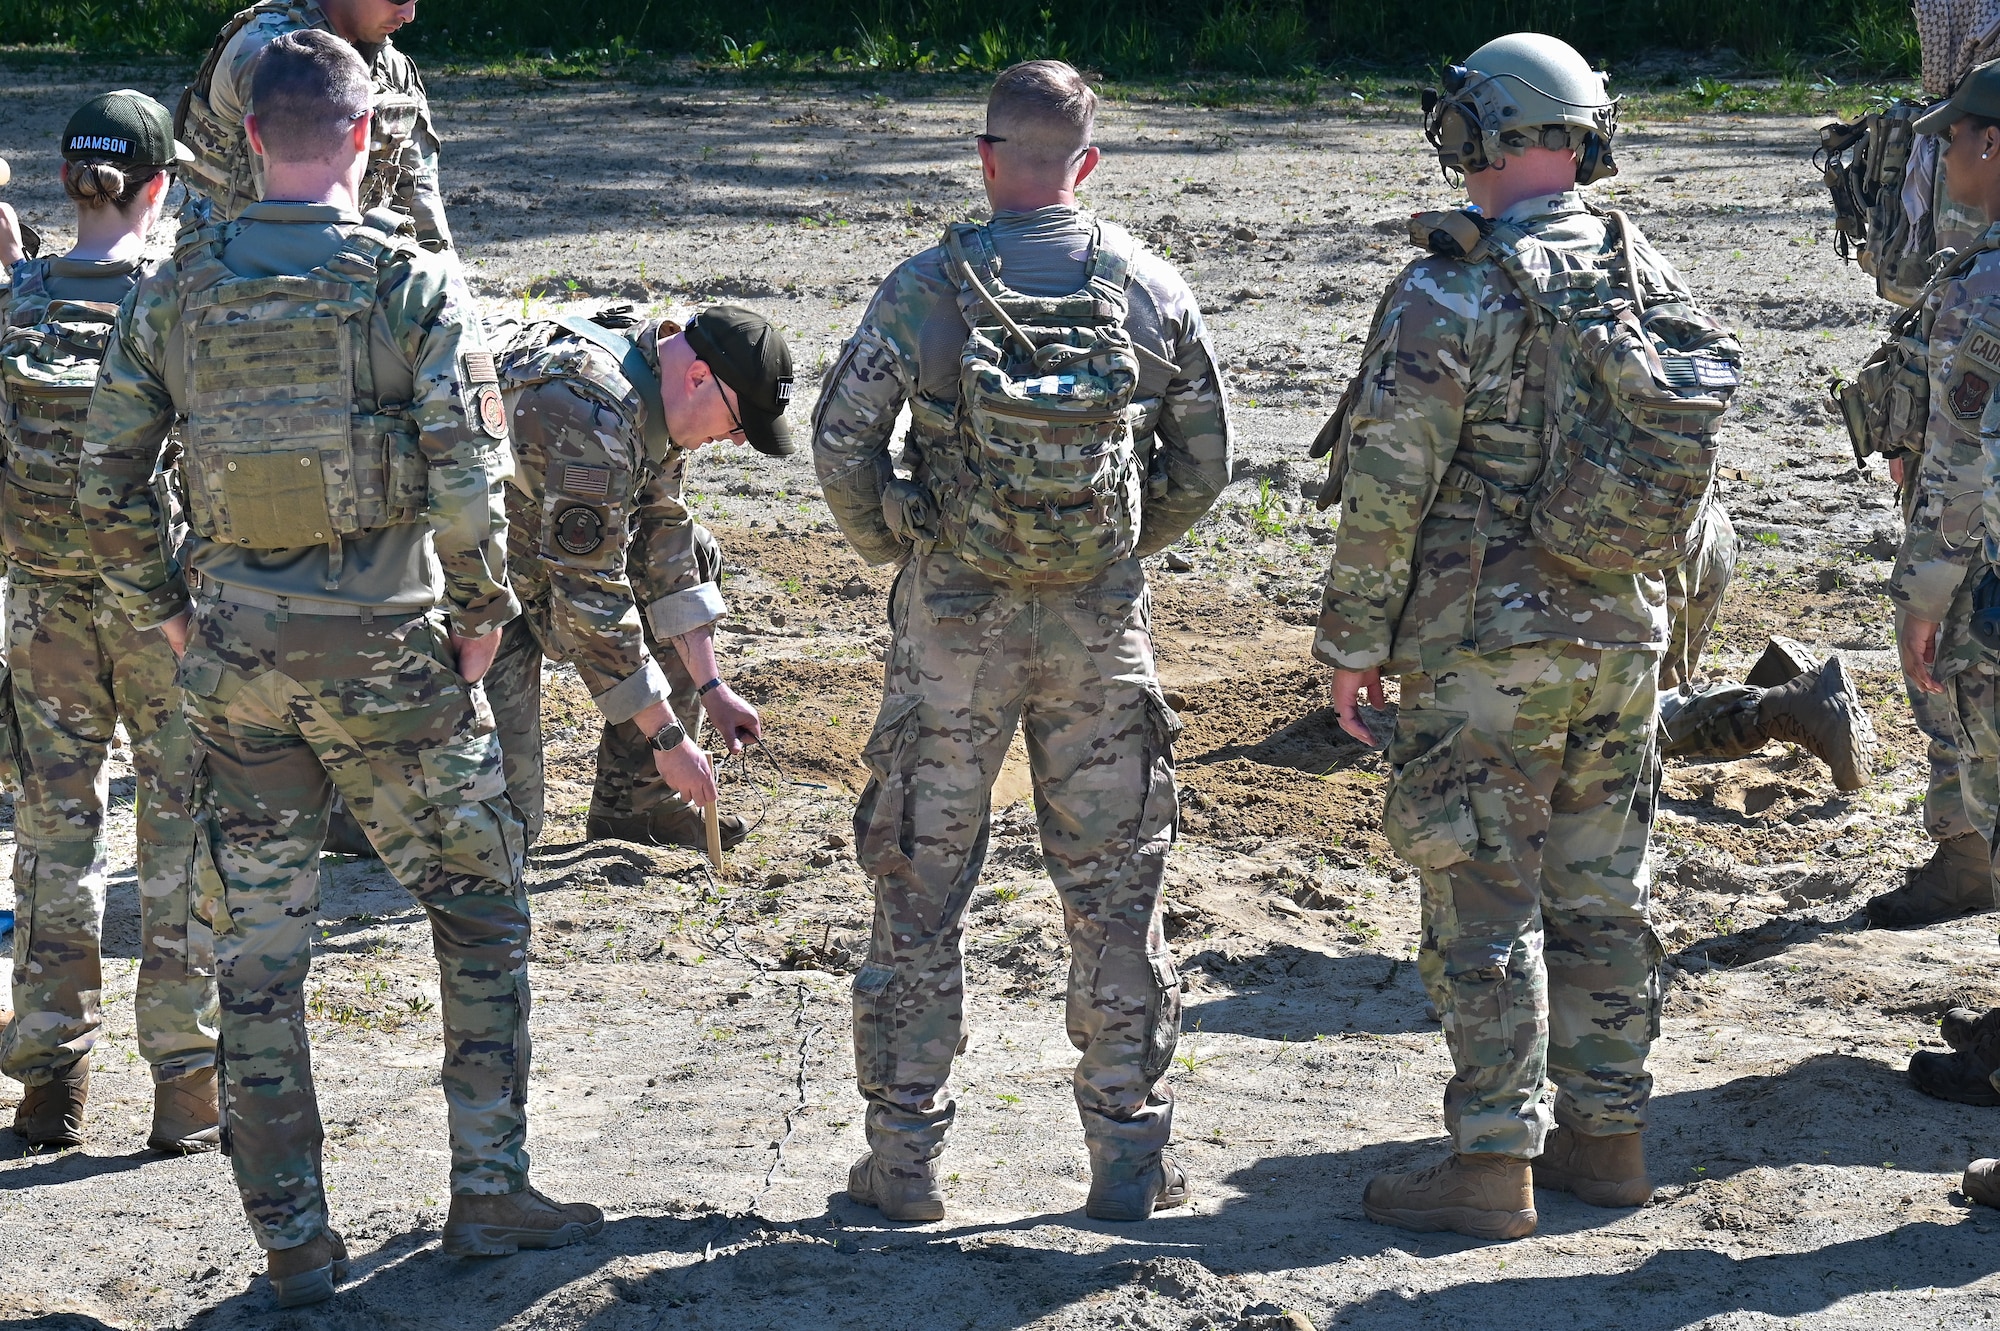 Senior Master Sgt. Jason Knepper, Air Force Reserve Command Security Forces training manager, gives instructions on how to detonate a claymore to the Integrated Defense Leadership Course cadre on June 1, 2023, at Camp James A. Garfield Joint Military Training Center, Ohio.